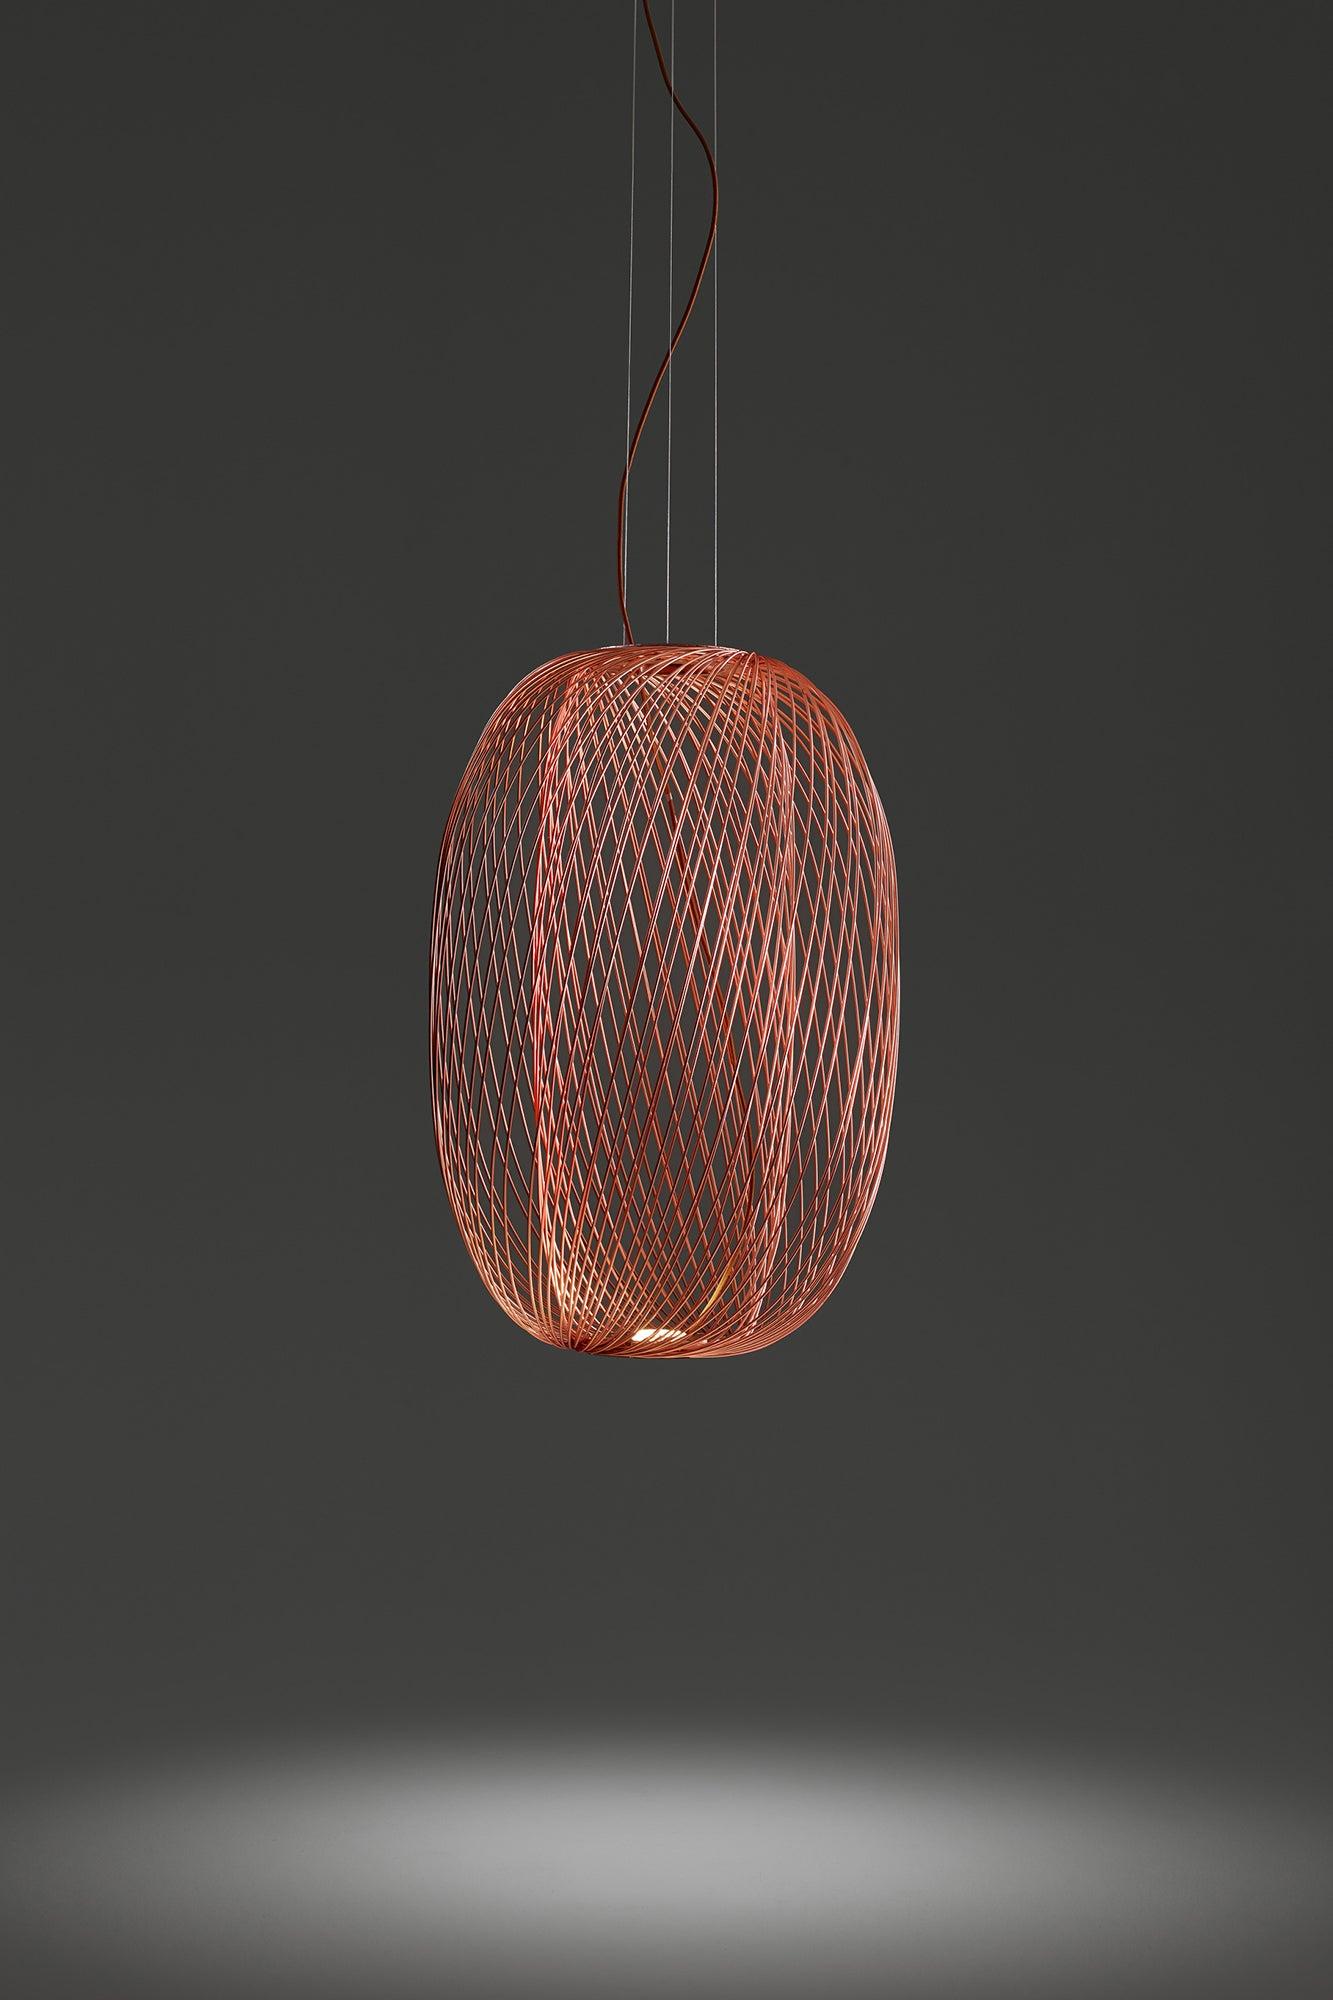 Stephen Burks Anwar T 90 Copper for Parachilna

Each structure is composed by nearly 100 steel rods welded one by one. It’s an artisanal lamp that reminds traditional wicker baskets. Different shapes and different finishes can be